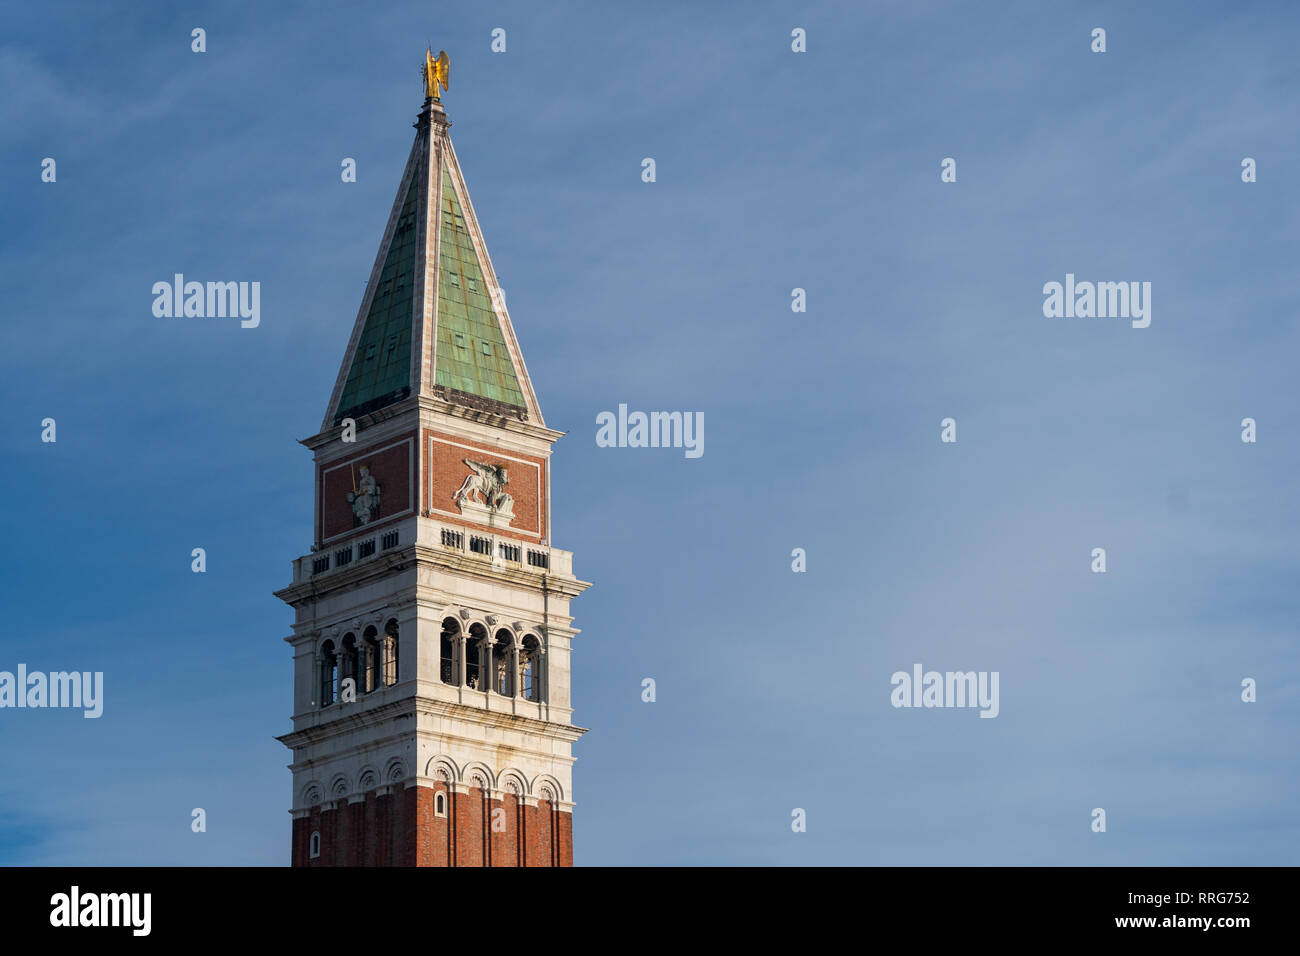 Views of St Mark's Campanile in Venice. From a series of travel photos in Italy. Photo date: Monday, February 11, 2019. Photo: Roger Garfield/Alamy Stock Photo